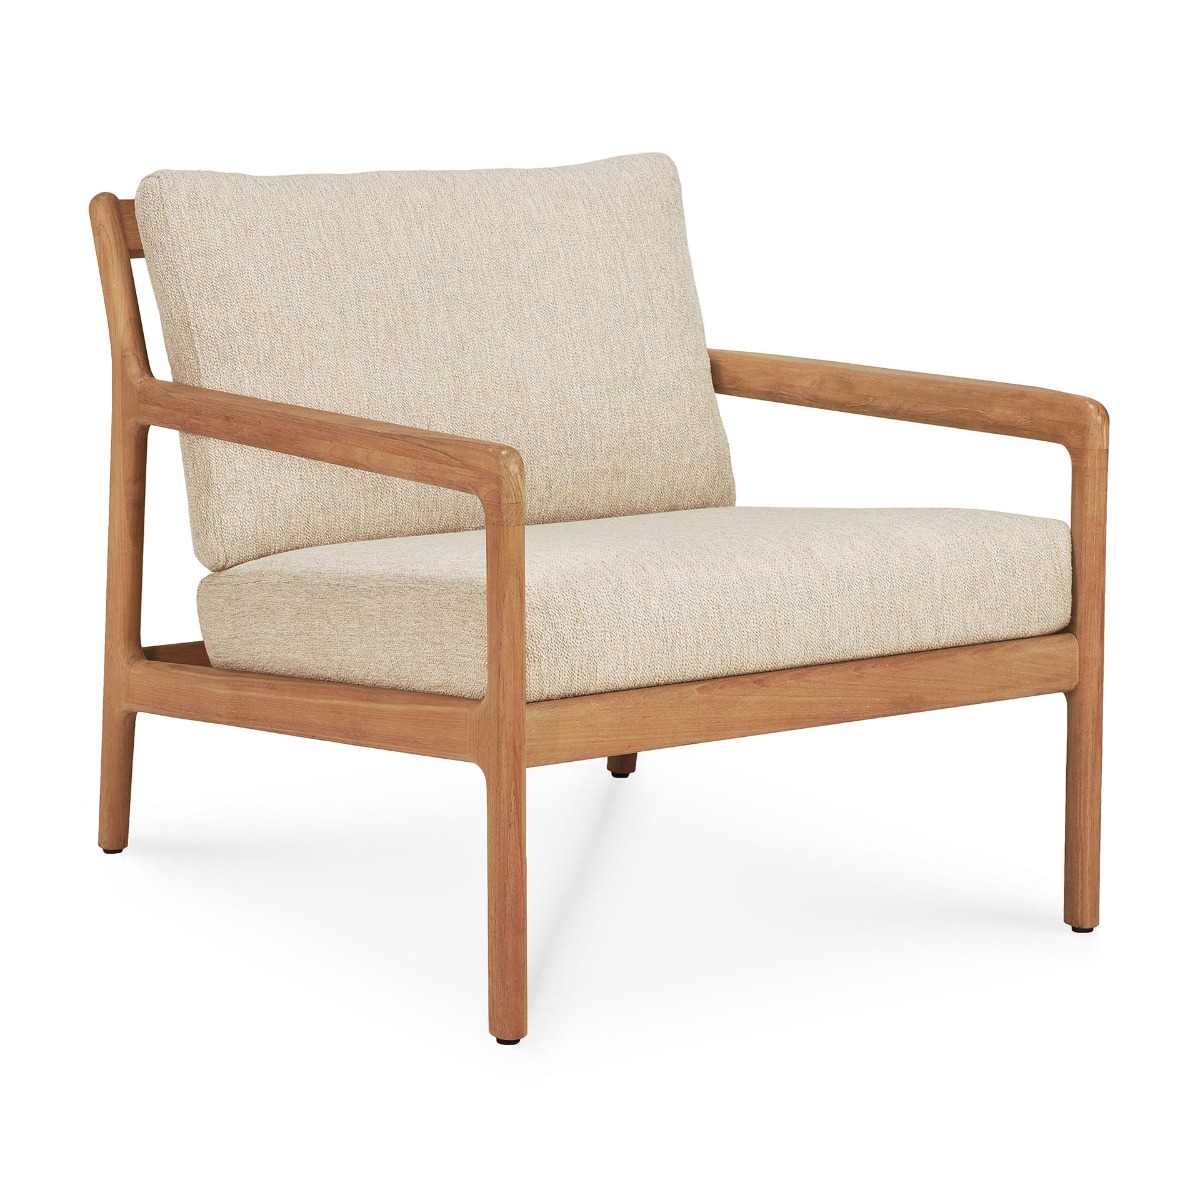 Jack outdoor teak lounge chair in natural